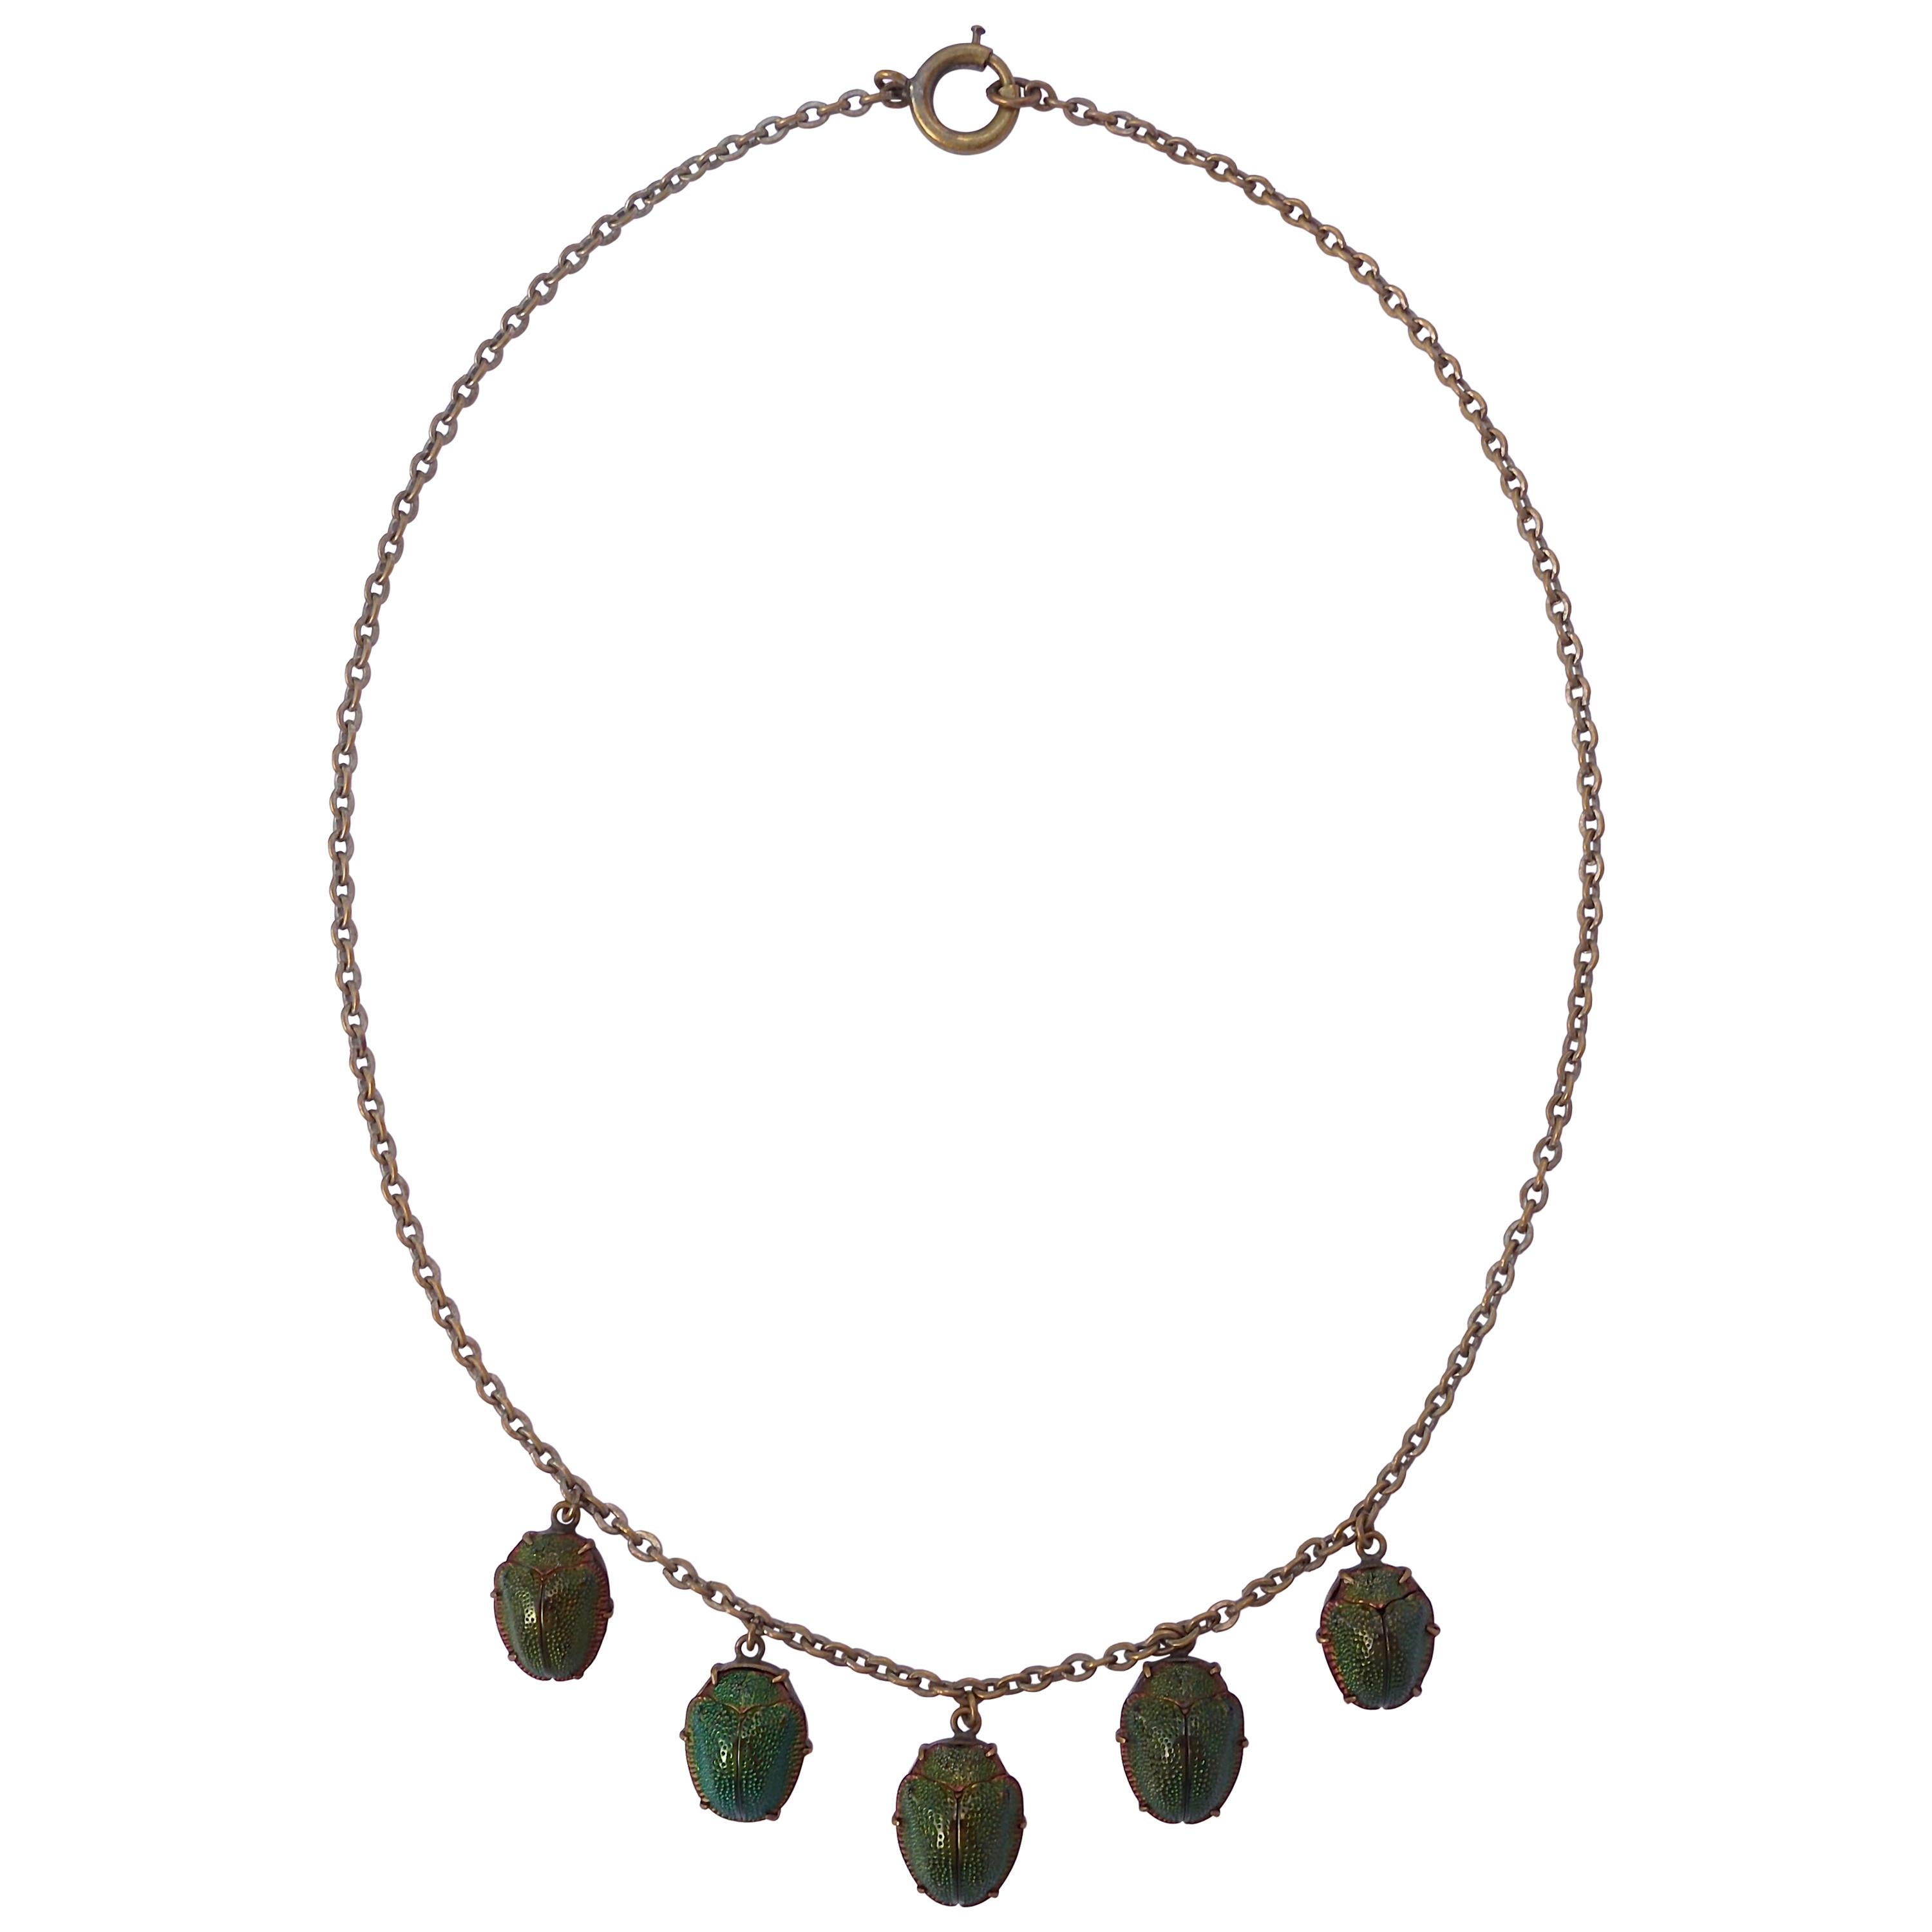 Vintage Gold Tone Real Iridescent Green Scarab Beetle Drop Necklace, circa 1920s